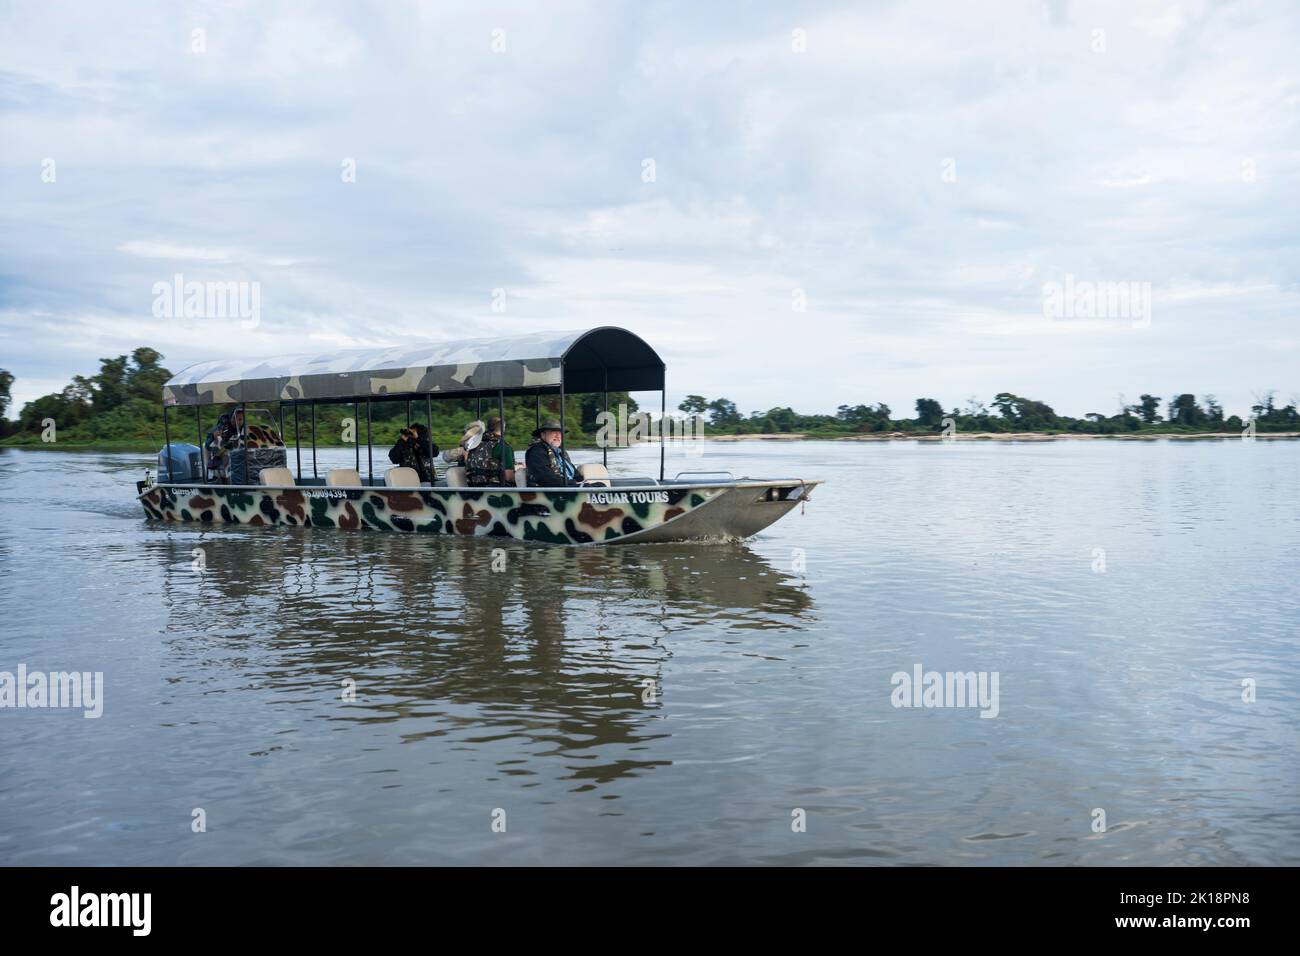 An excursion boat with tourists on the Paraguay River near Baiazinha Lodge located in the Northern Pantanal, State of Mato Grosso, Brazil. Stock Photo